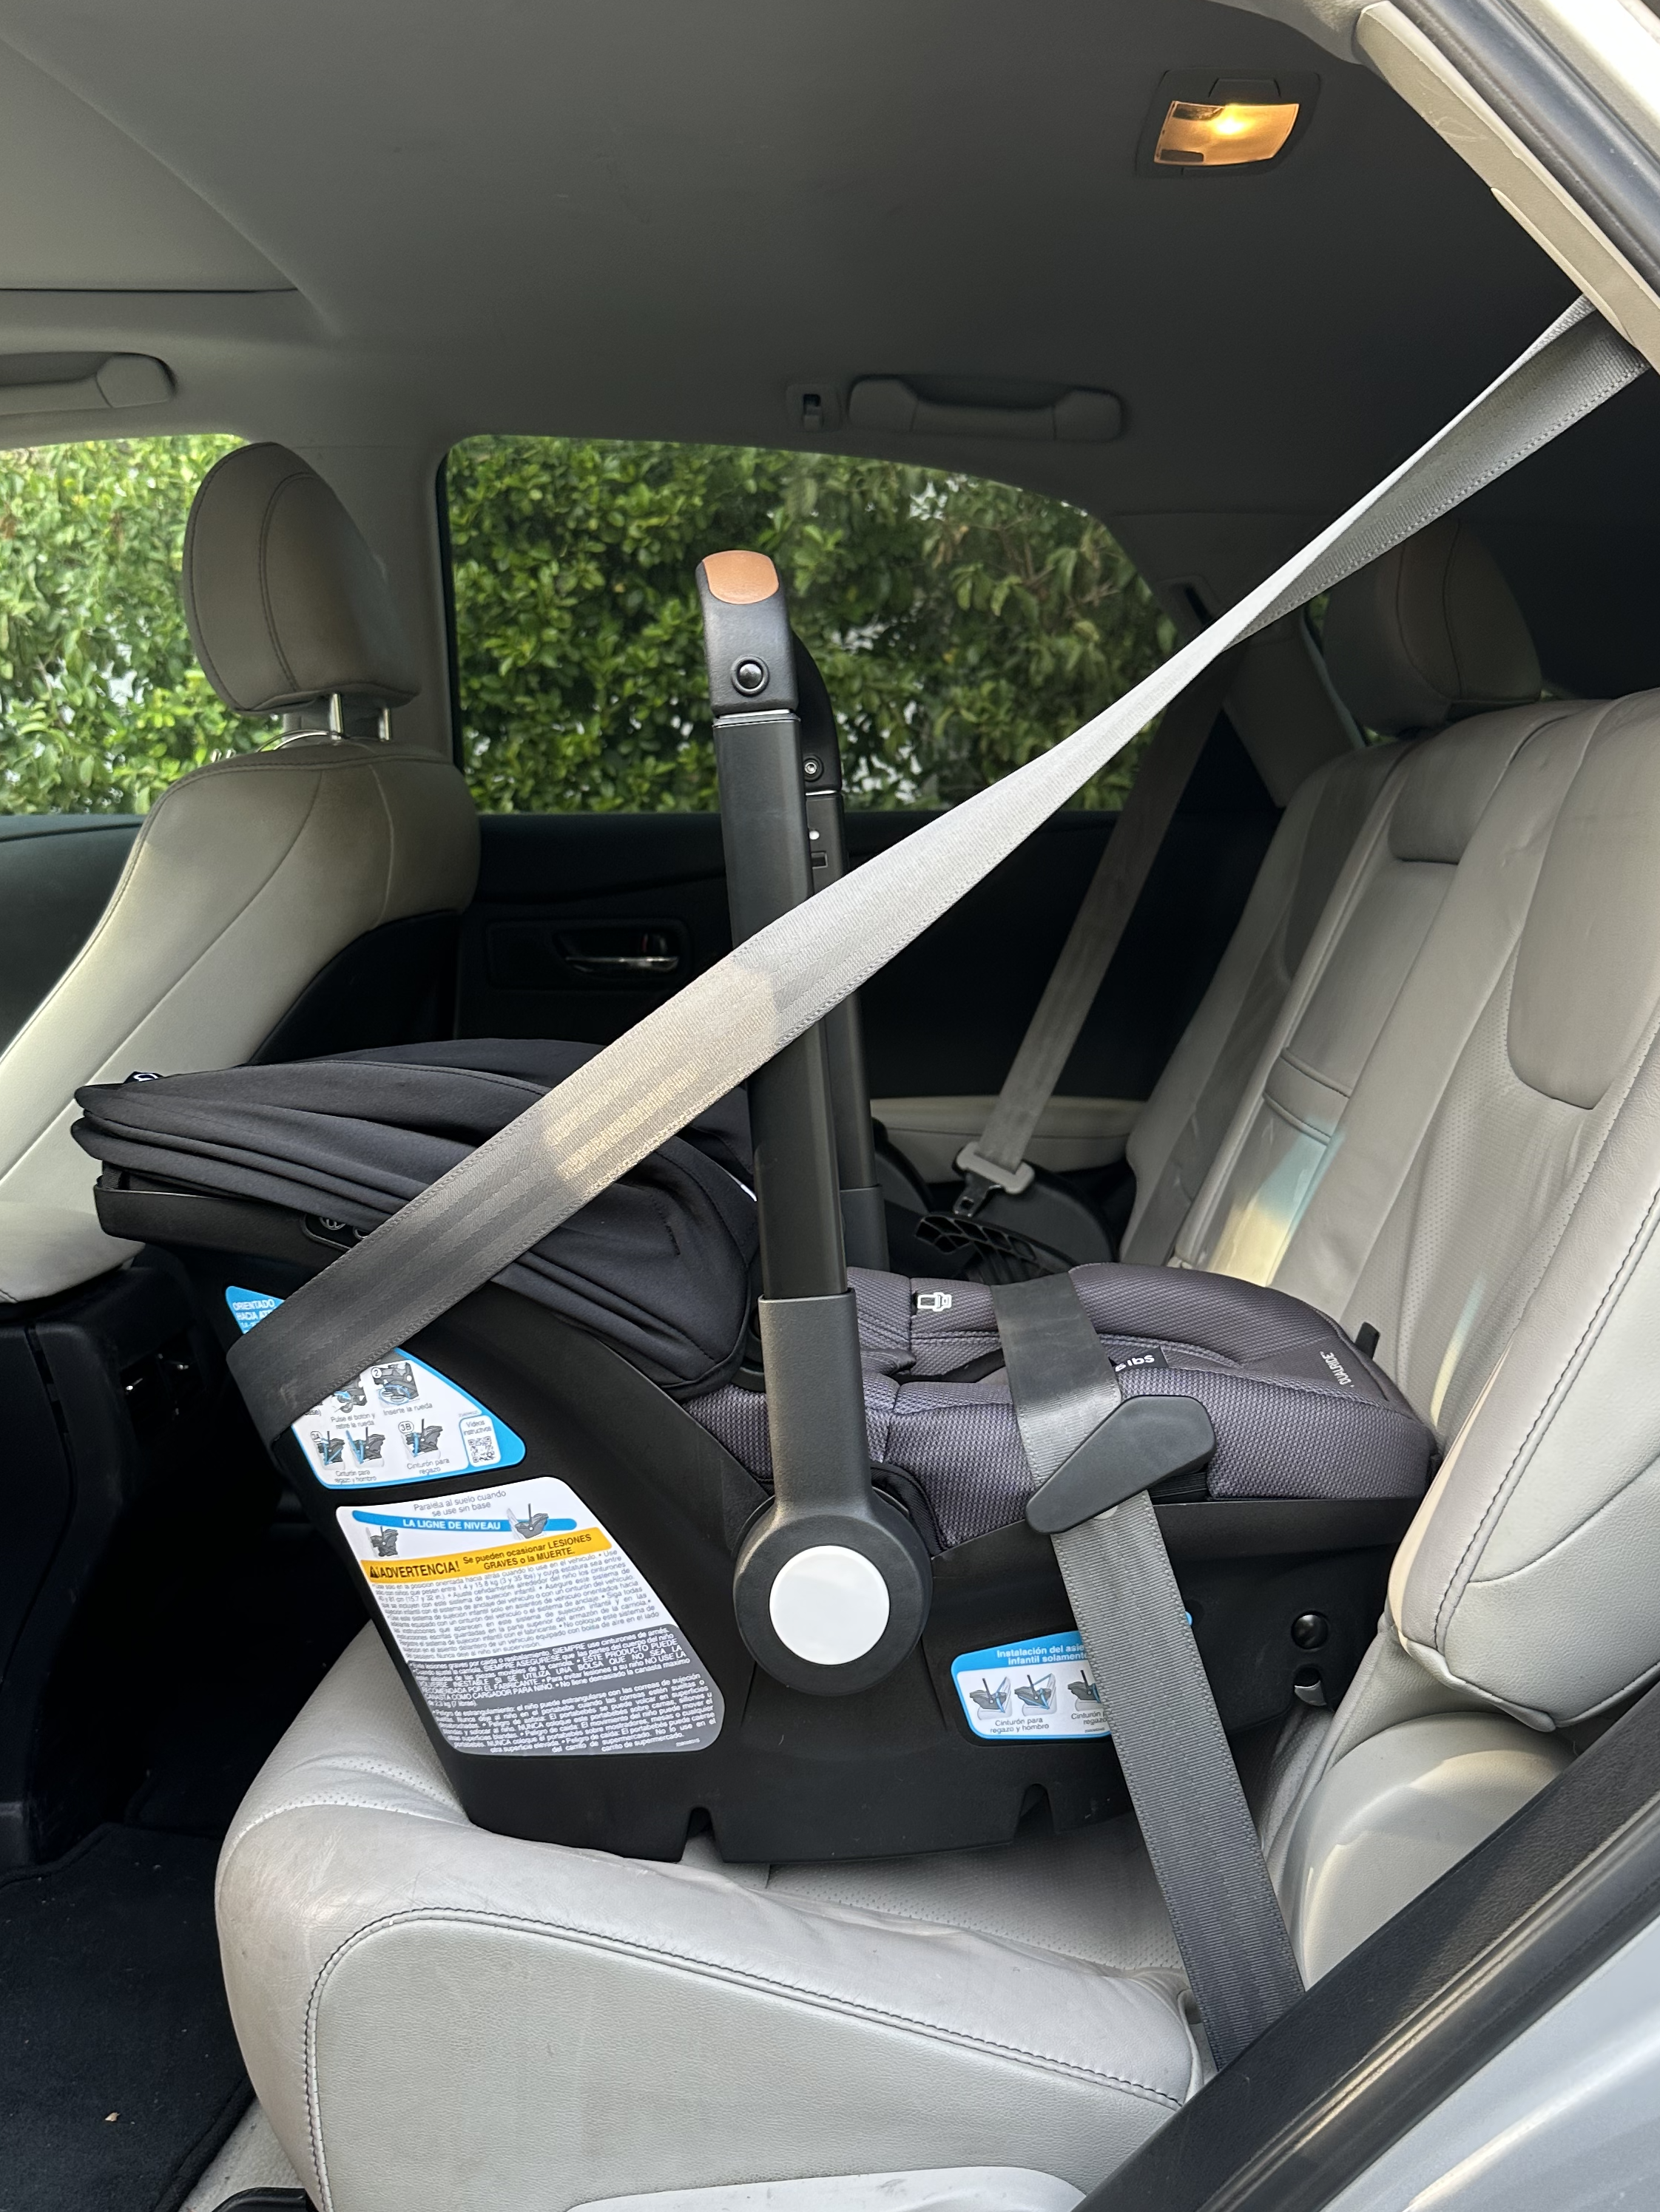 Evenflo Shyft DualRide Car Seat Review | Installed baseless without the wheels attached